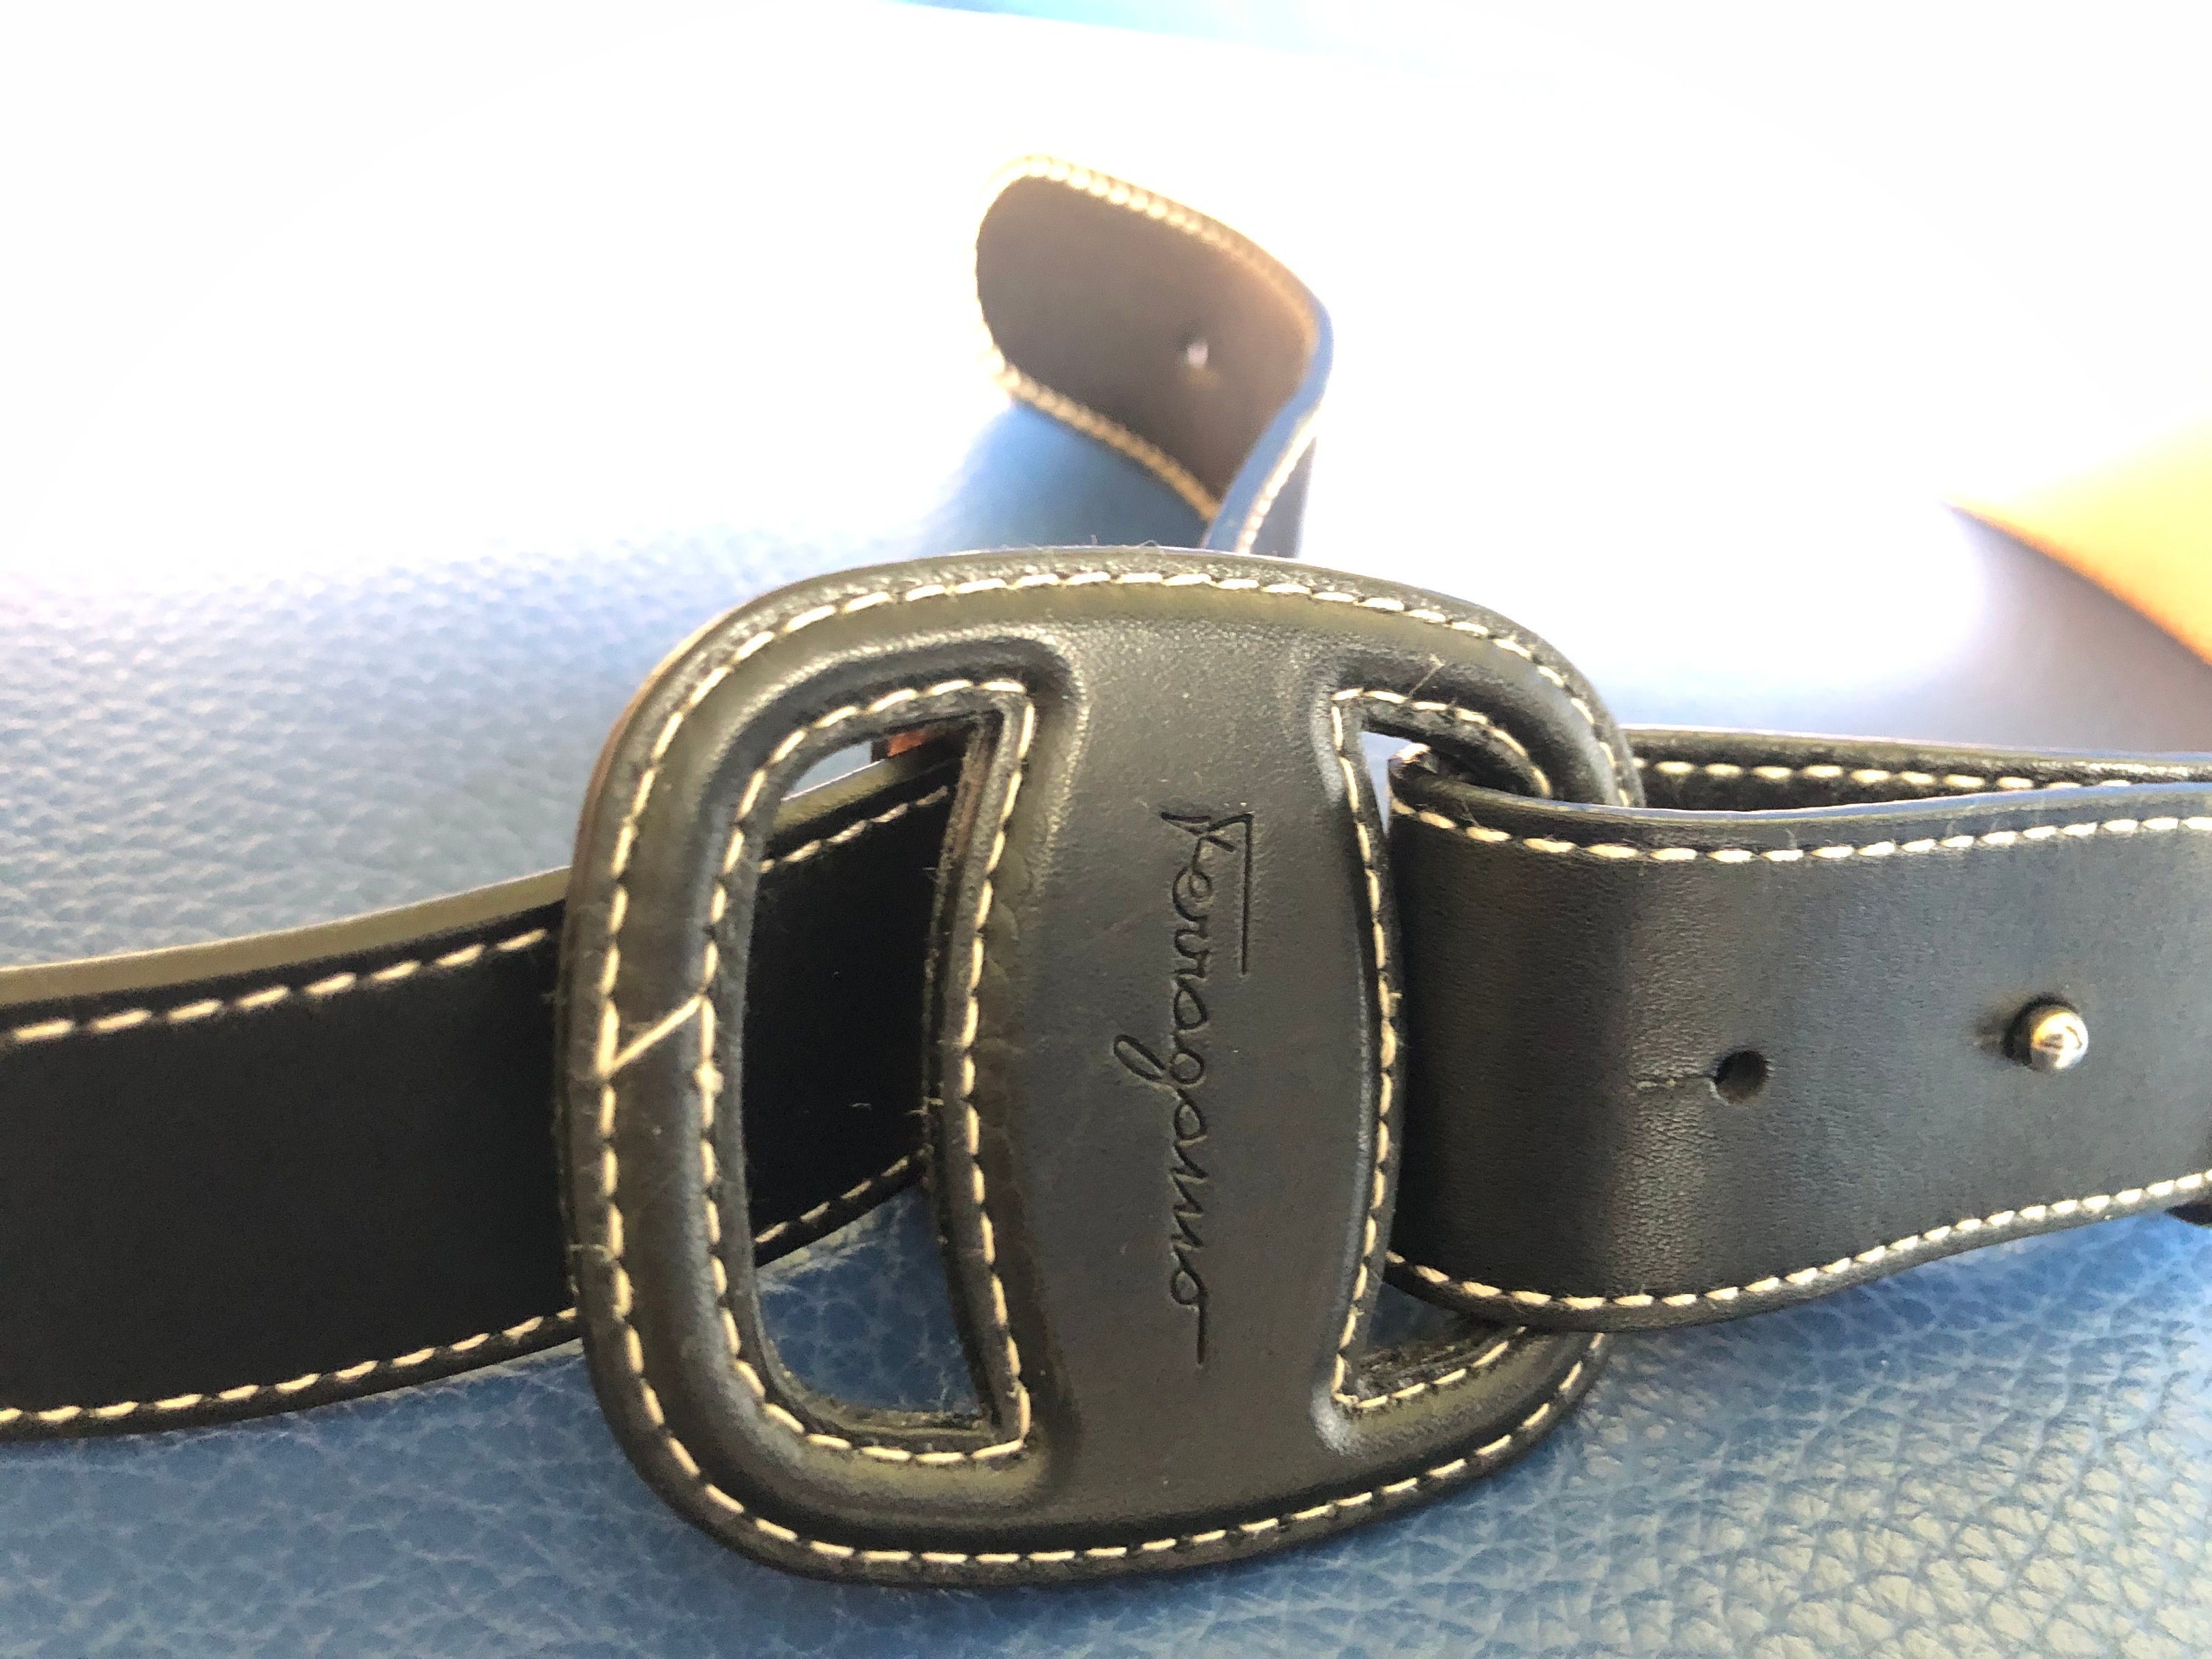 Ferragamo Belts (REAL LEATHER, TOP QUALITY 1:1 from SUPLOOK) Pls